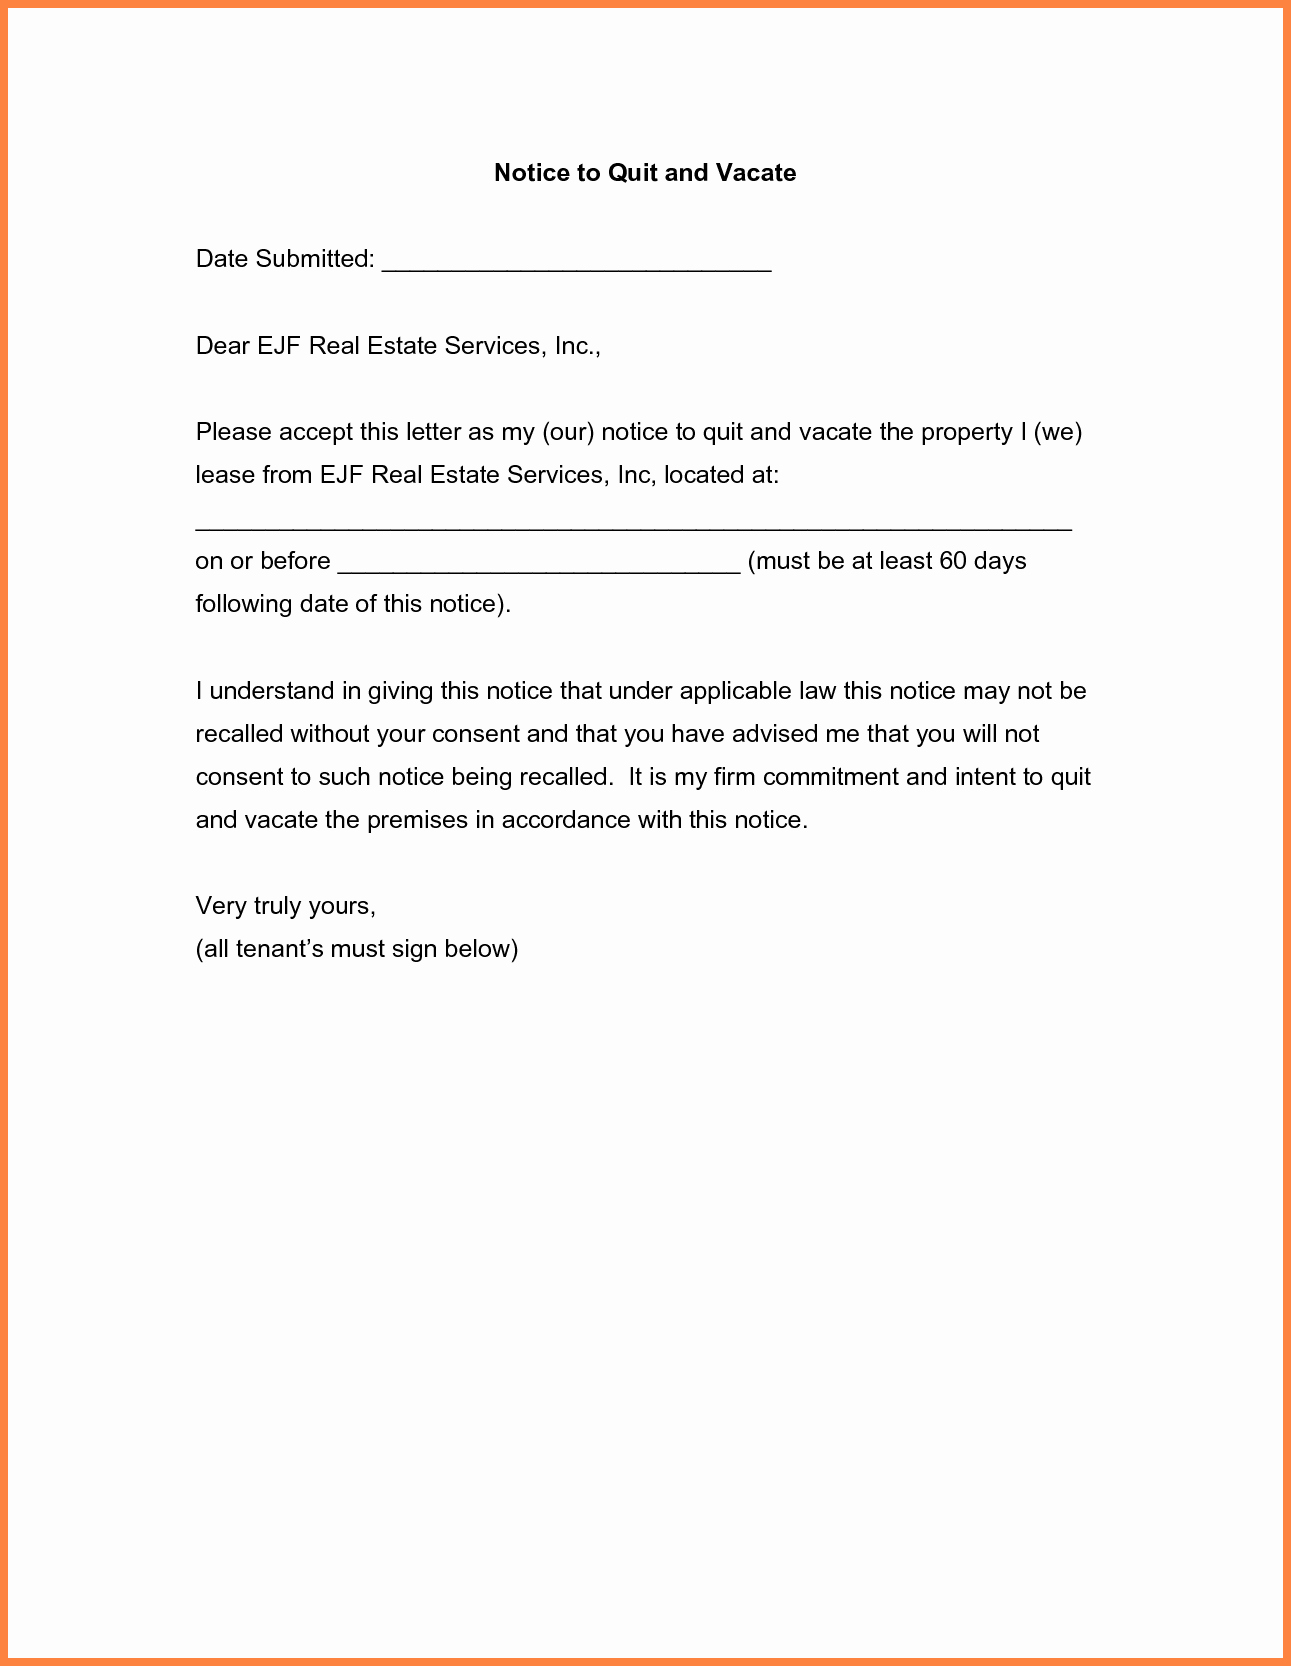 30 Day Notice Sample Awesome 6 Tenant 30 Day Notice to Vacate Sample Letter